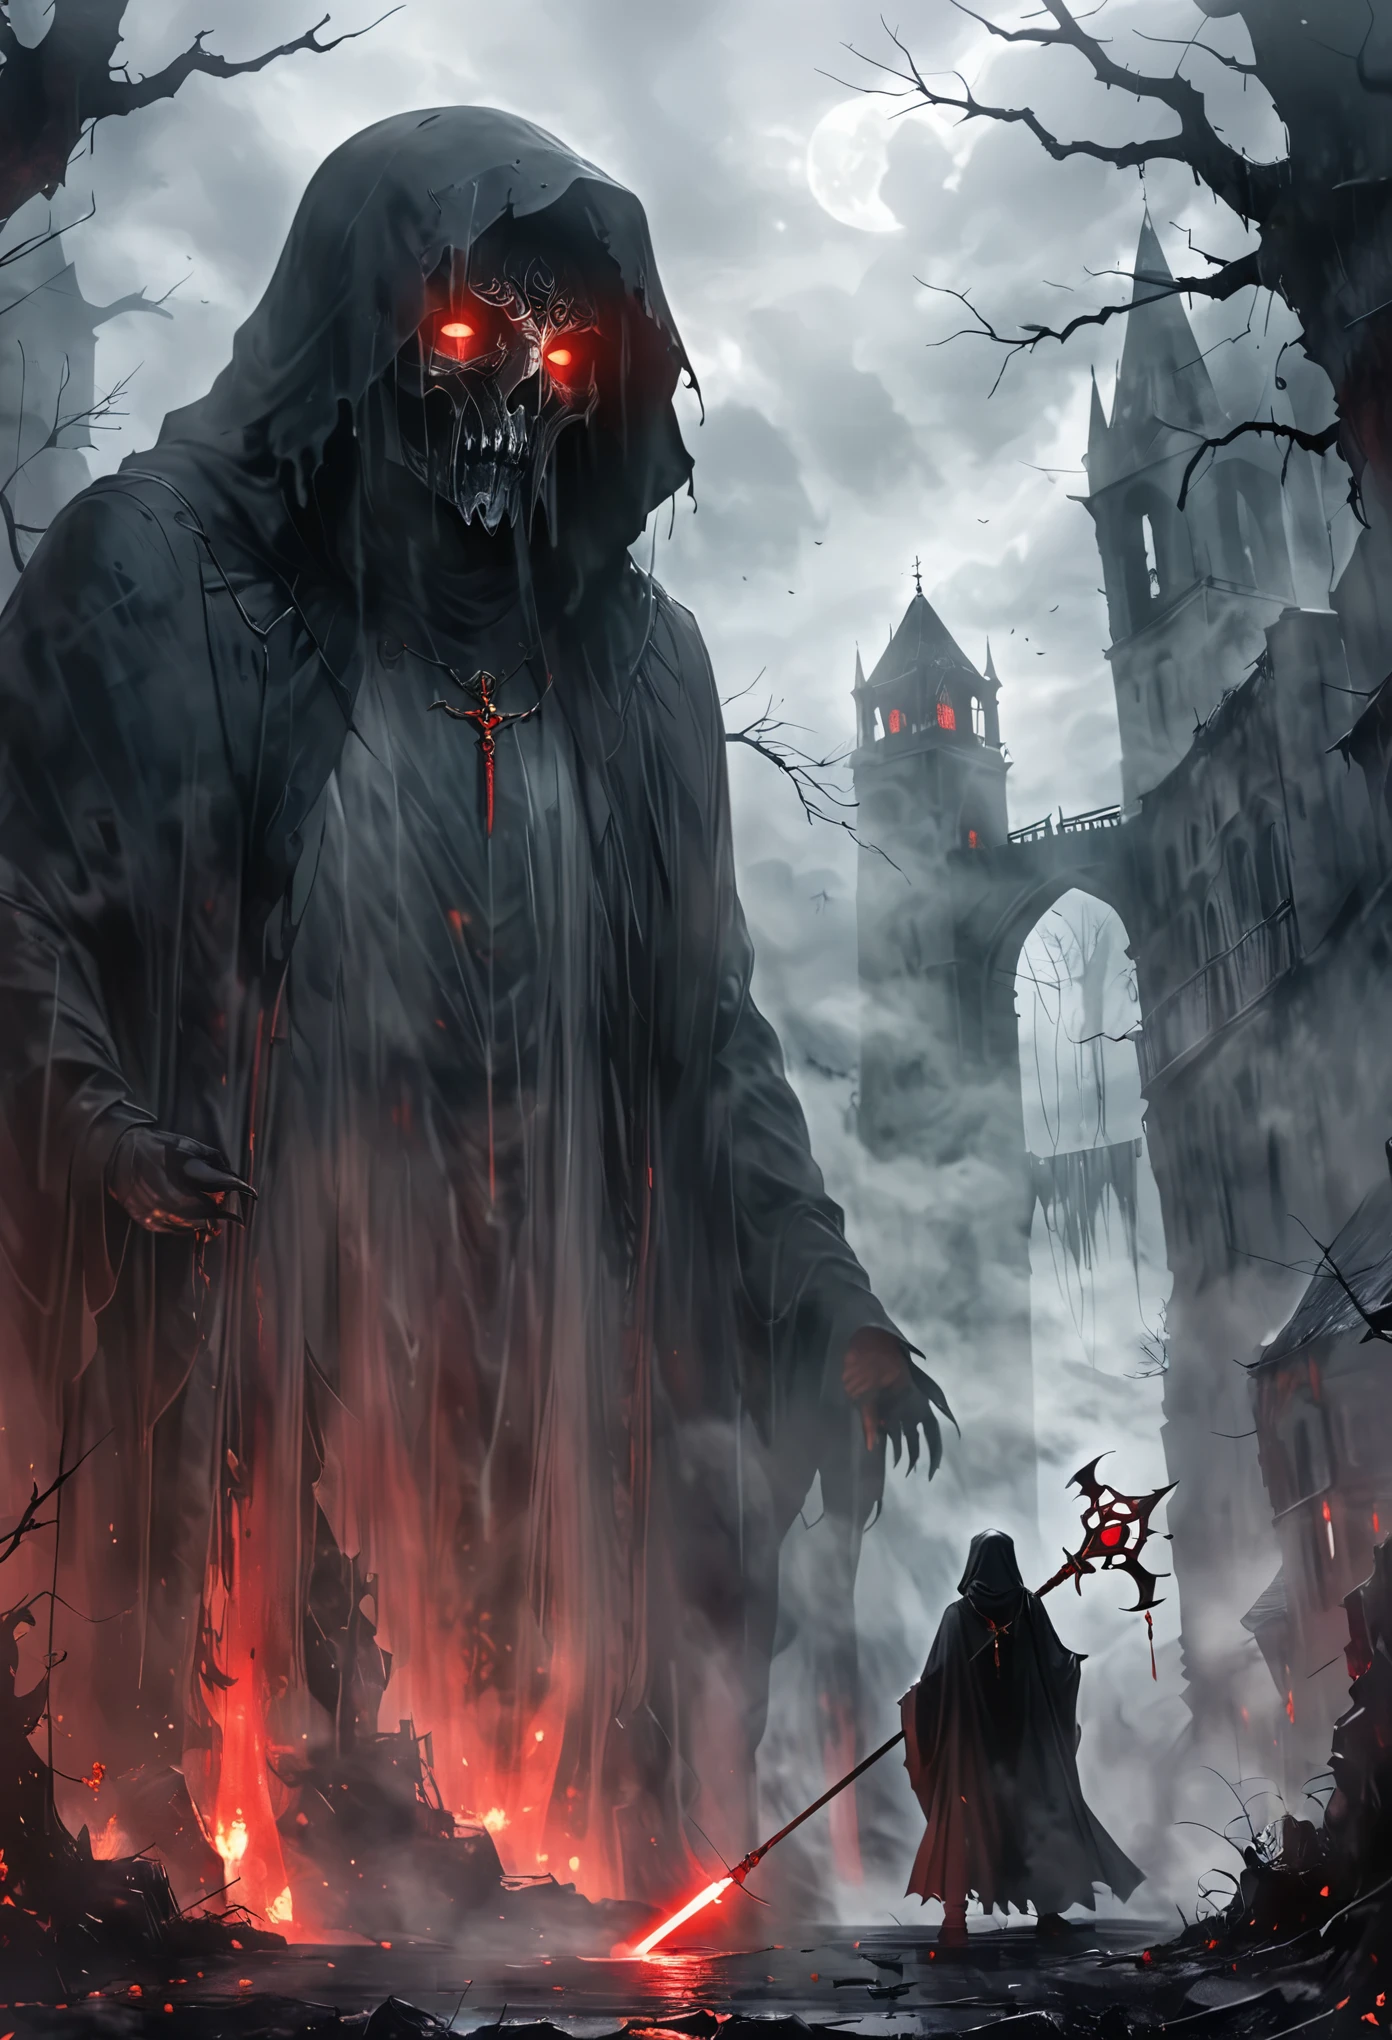 Imagine a unique character shrouded in a flowing, dark cloak. They brandish an intimidating weapon, a bladed staff with a haunting crimson glow. This weapon seems to consume the life essence of its victims, leaving a cold, lifeless husk in its wake. The setting is a bleak, gothic realm cloaked in darkness and defined by an unworldly architecture. Mist pervades the lands, adding a sense of eerie desolation to the landscape. In this world, our mysterious character is on a seemingly endless quest for vengeance.